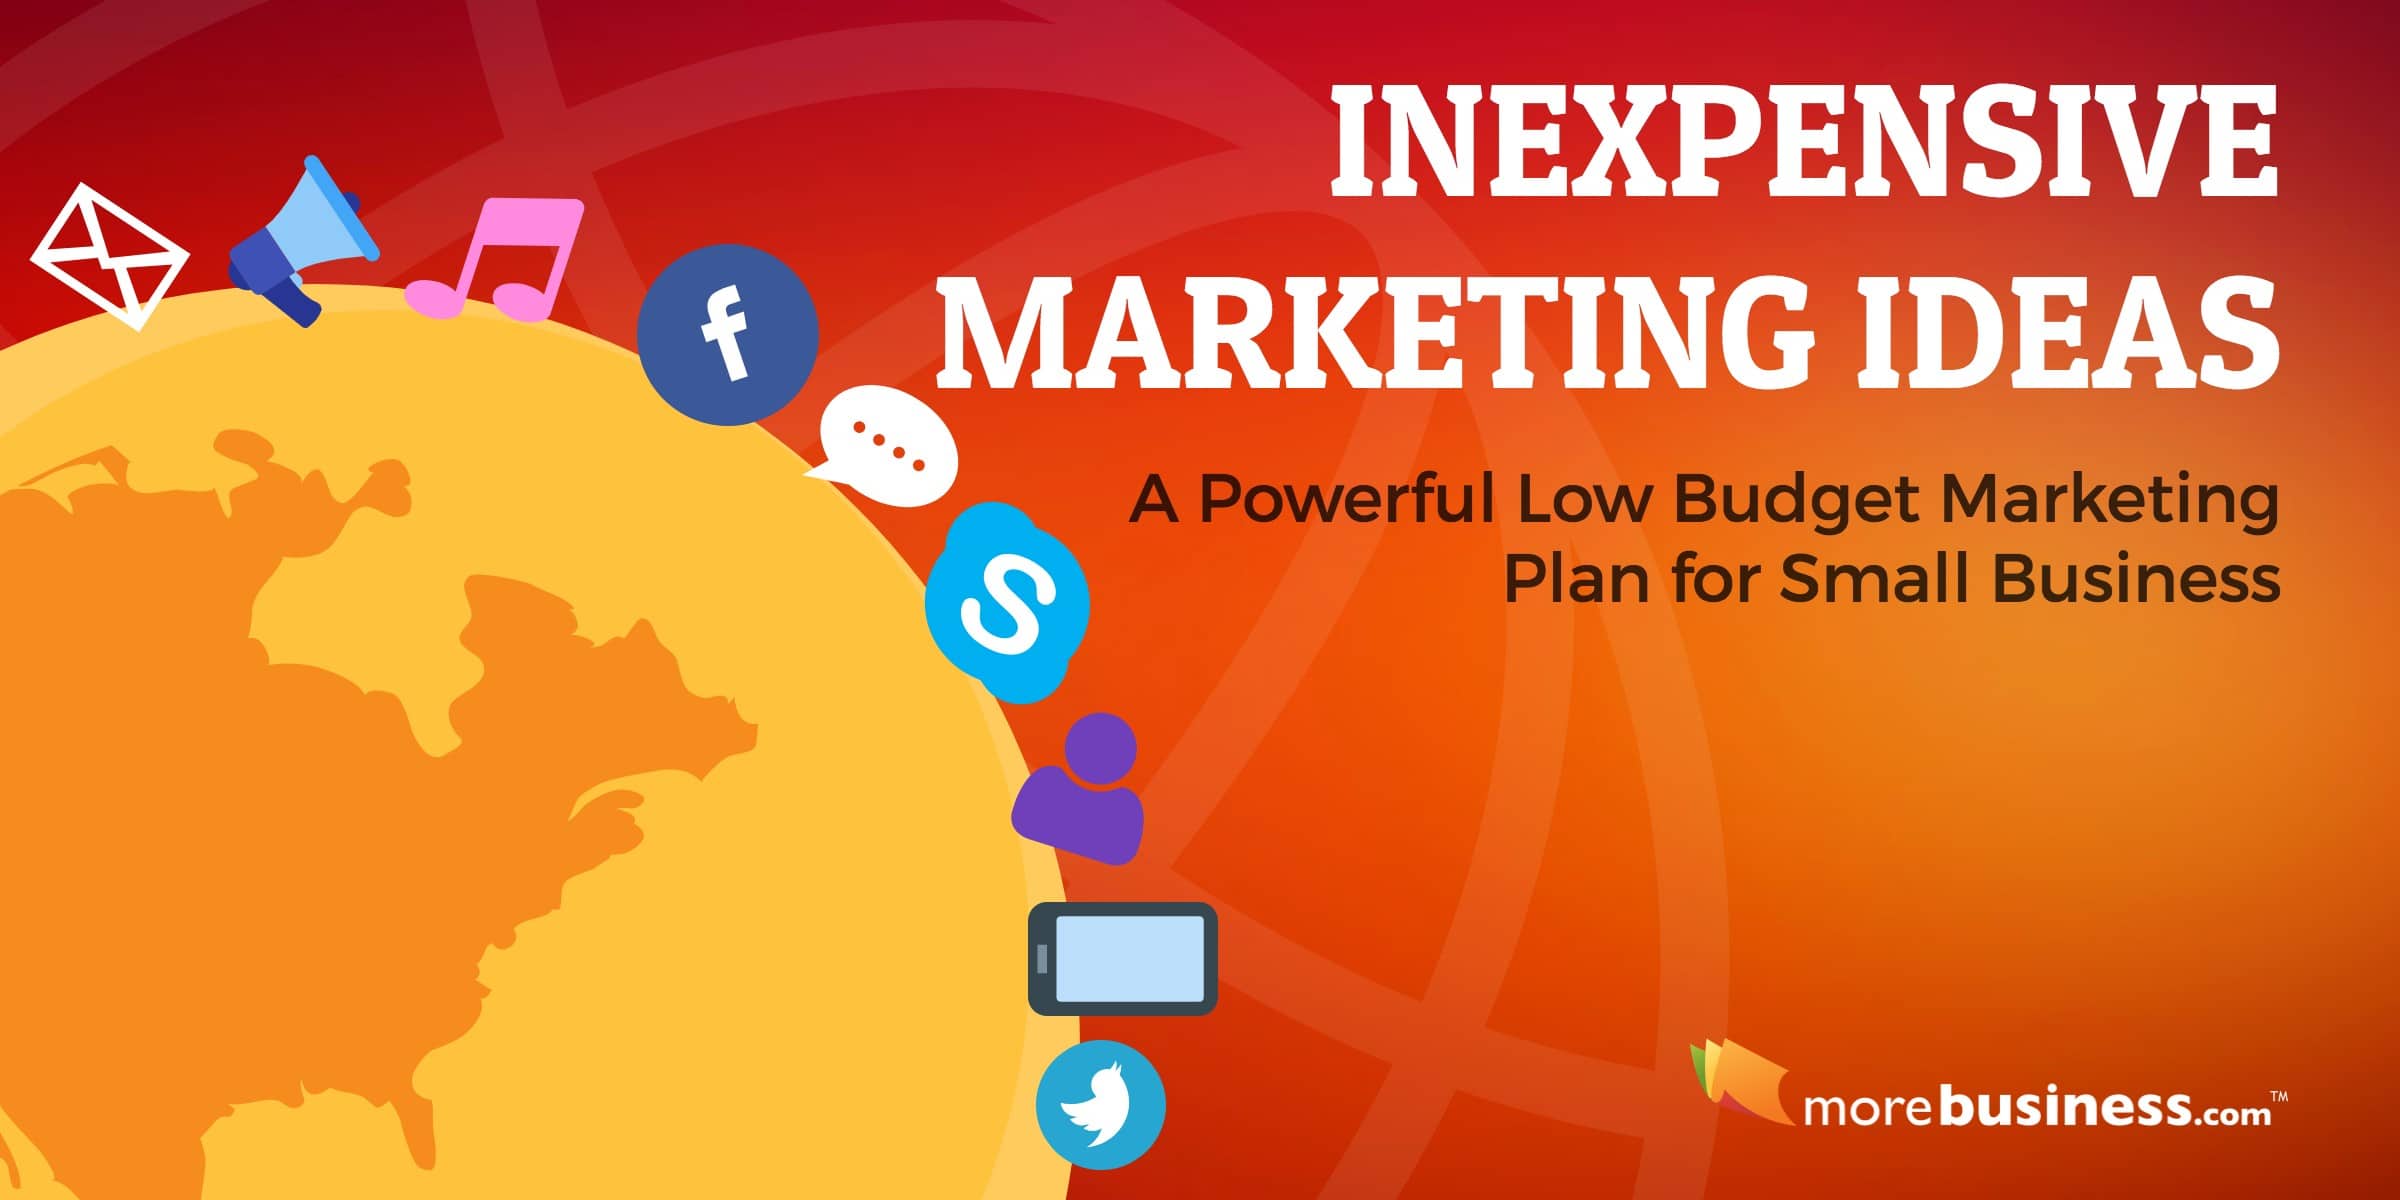 Low Budget Marketing Plan: Inexpensive Marketing Ideas for Small Business